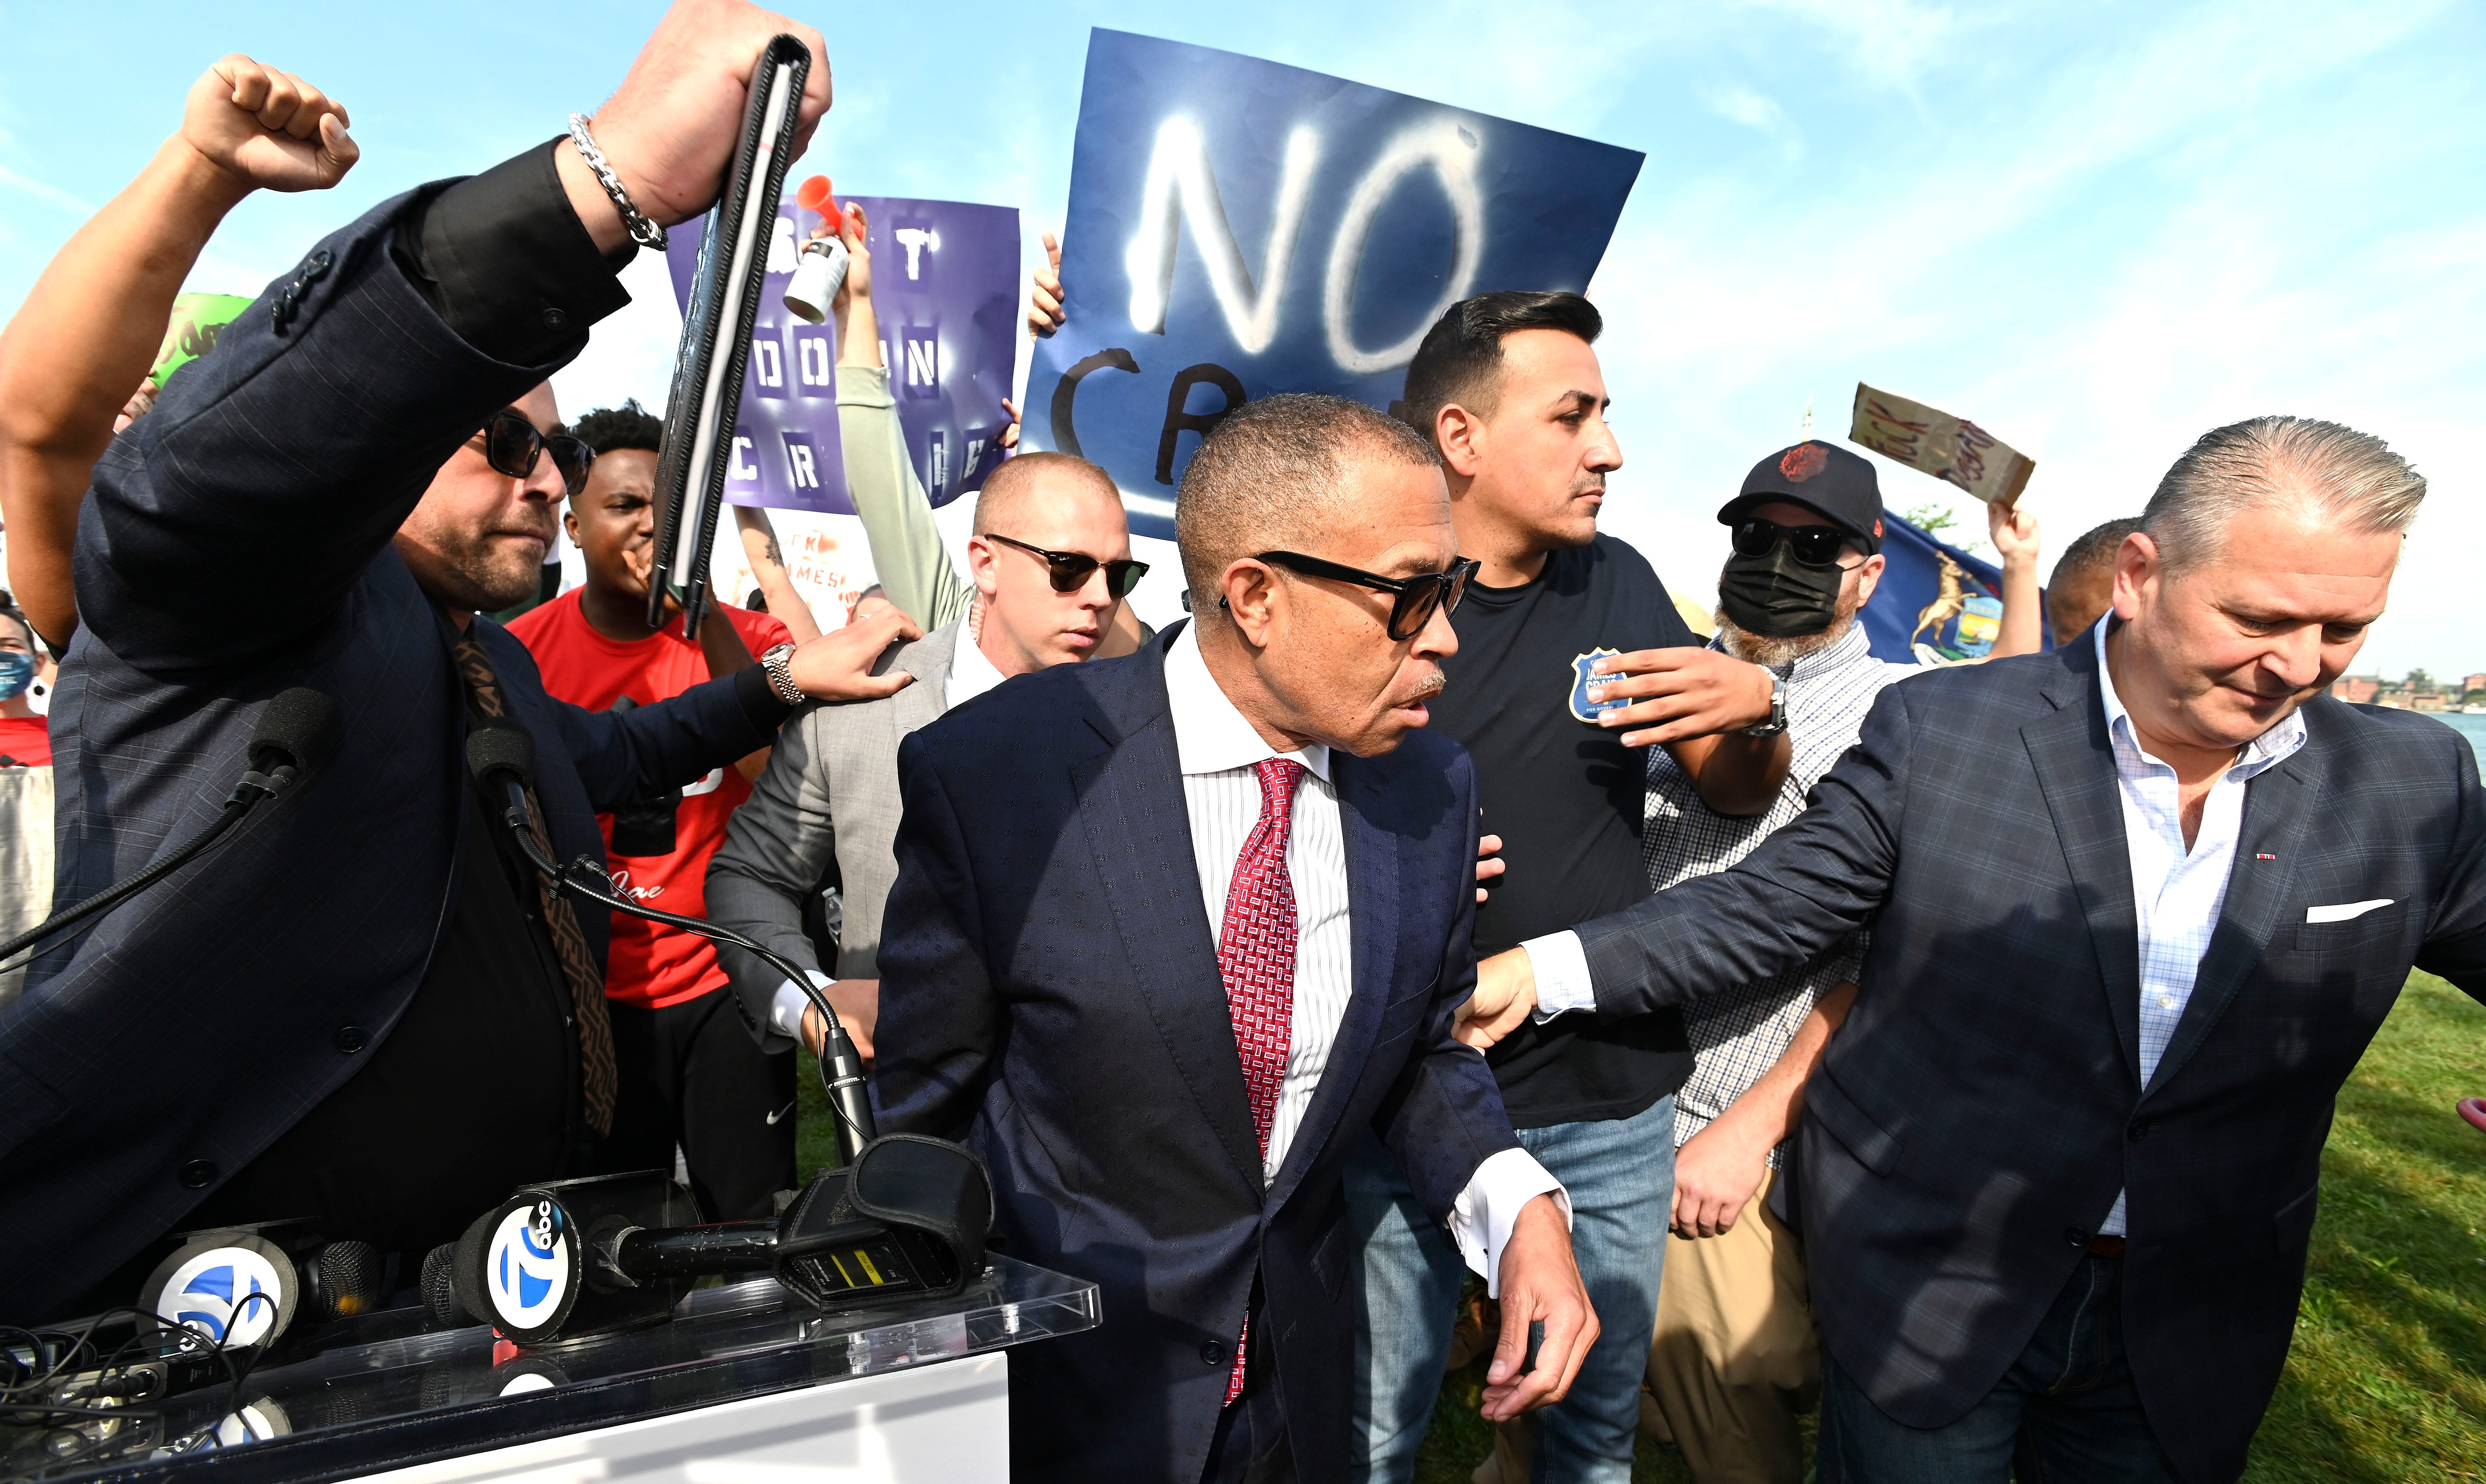 Former Detroit Police Chief James Craig is surrounded by staff and security personnel after he briefly announces his candidacy for governor at a podium on Belle Island amid the screams of protesters, Tuesday morning, September 14, 2021.